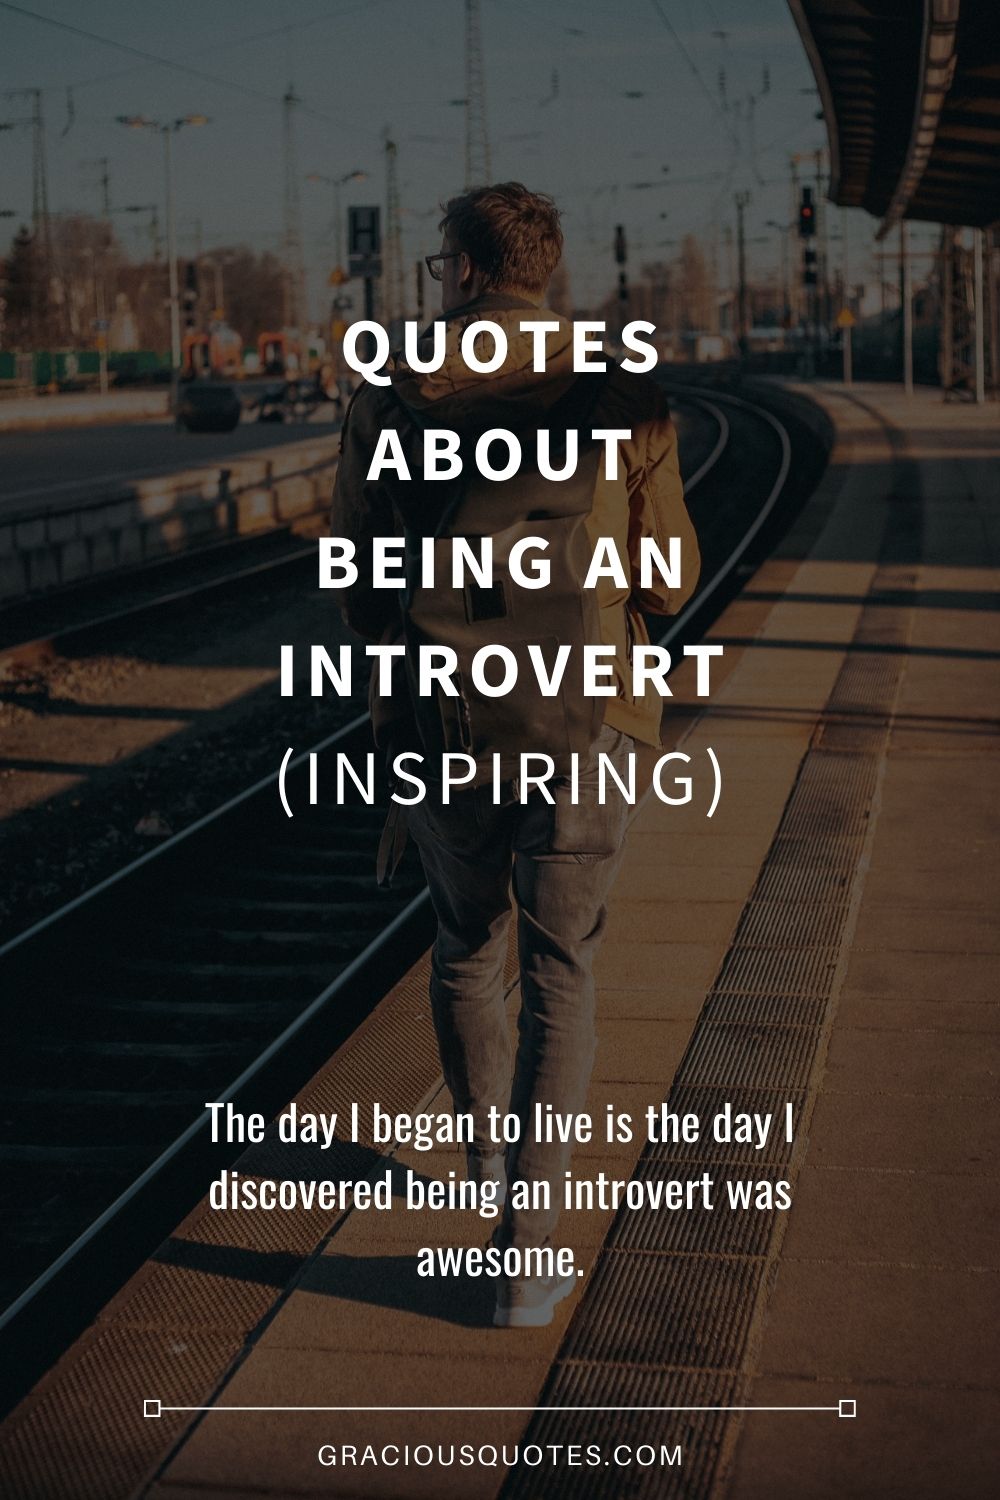 Quotes About Being an Introvert (INSPIRING) - Gracious Quotes